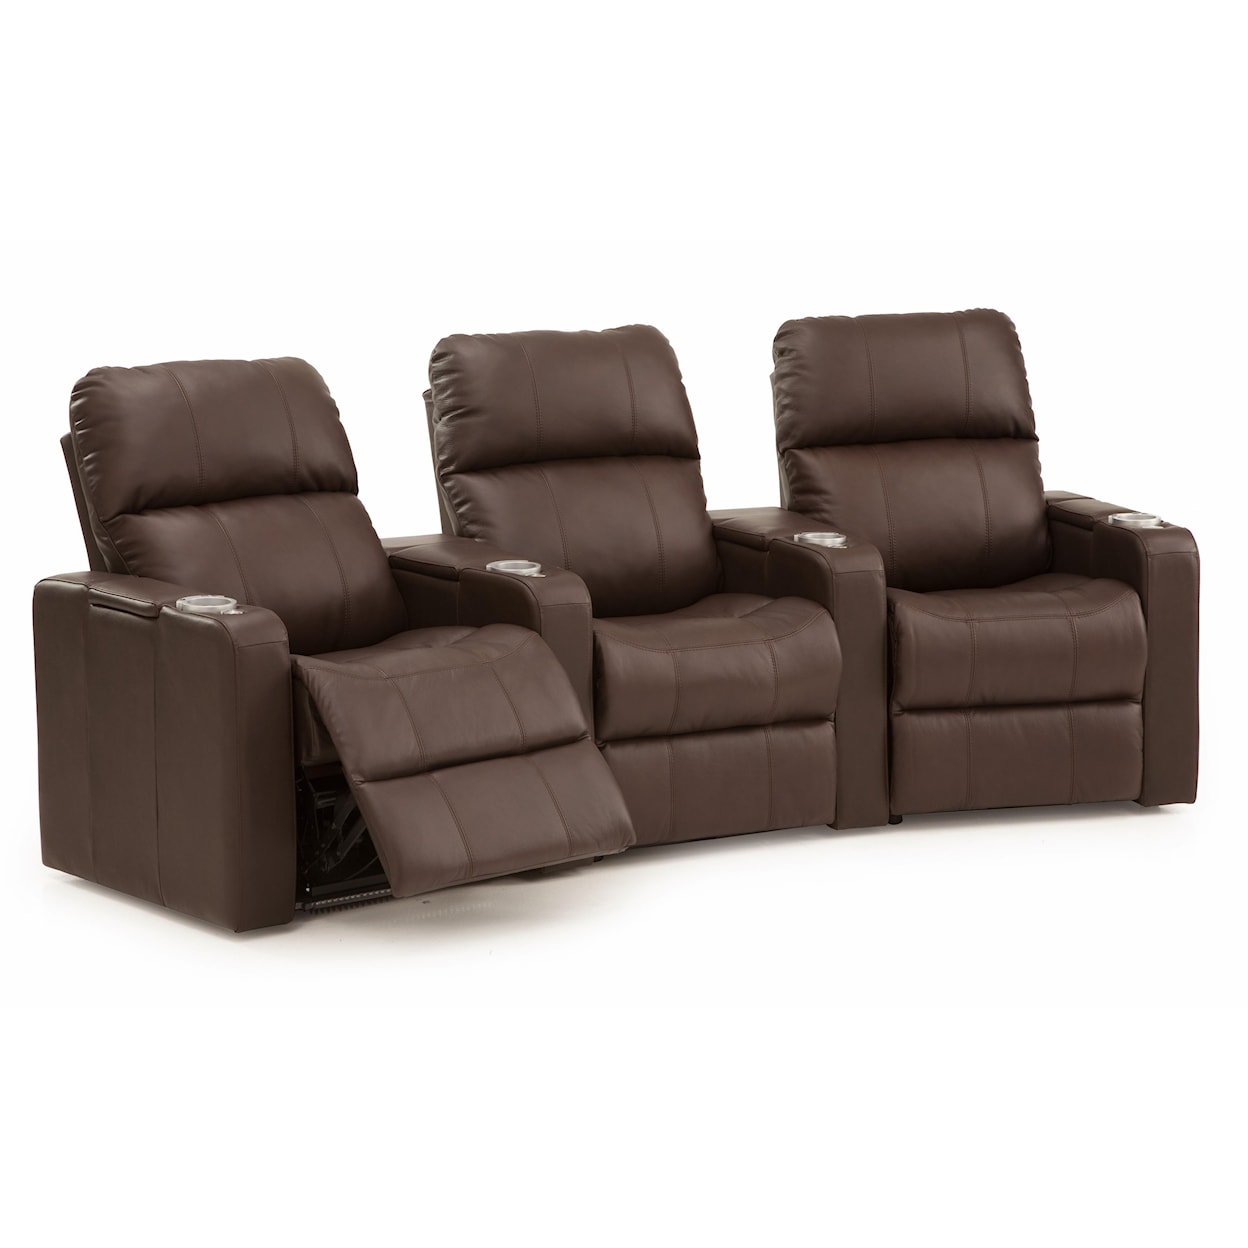 Palliser Rosseau Three Seat Curved Sectional